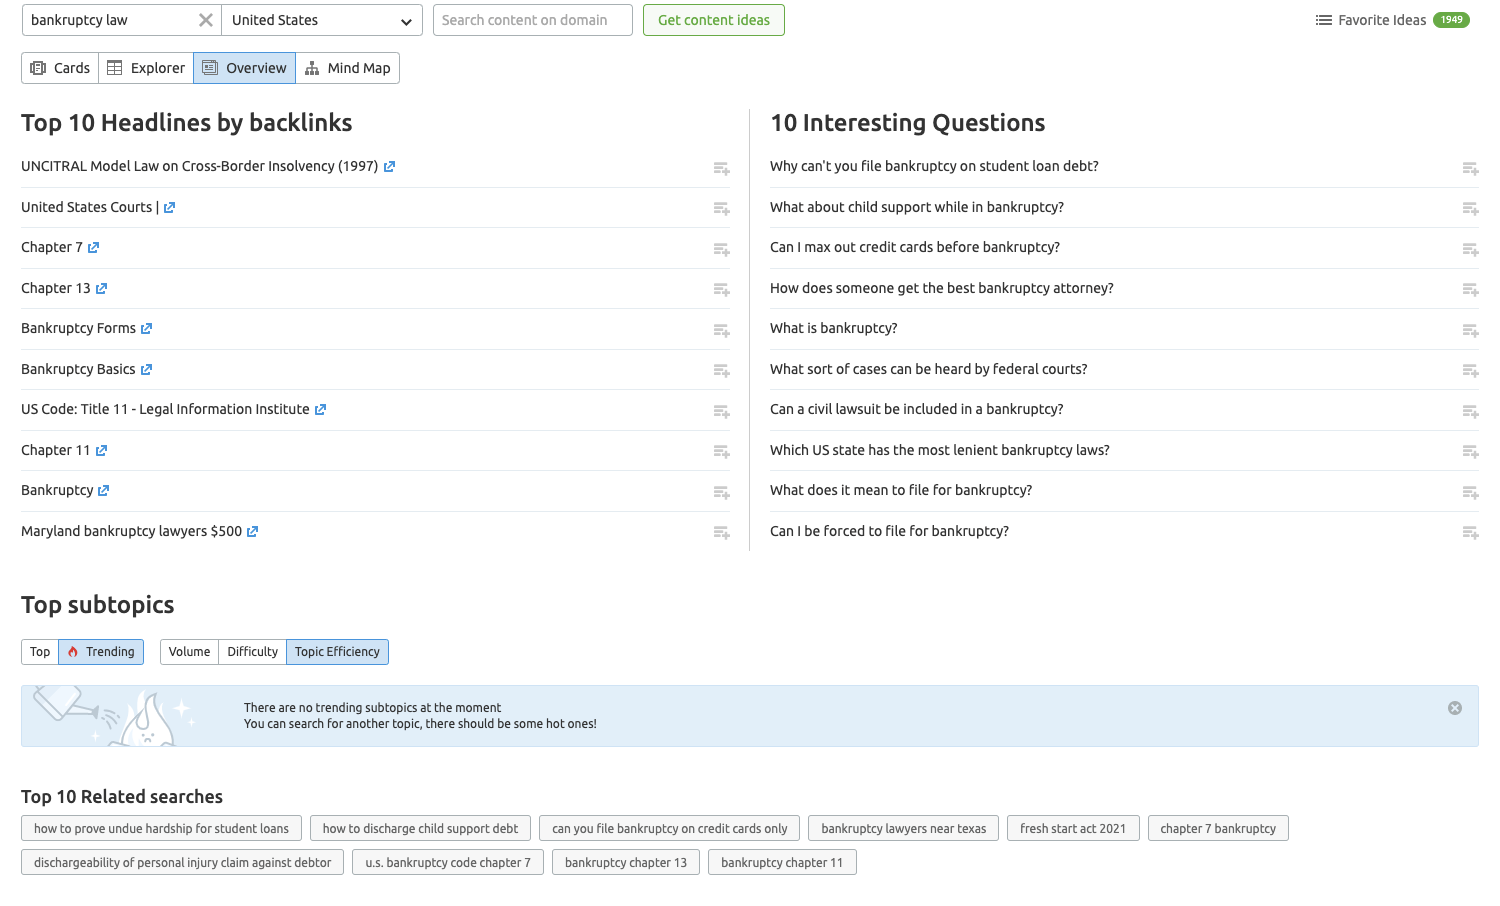 analyzing questions and headline for your content pillar